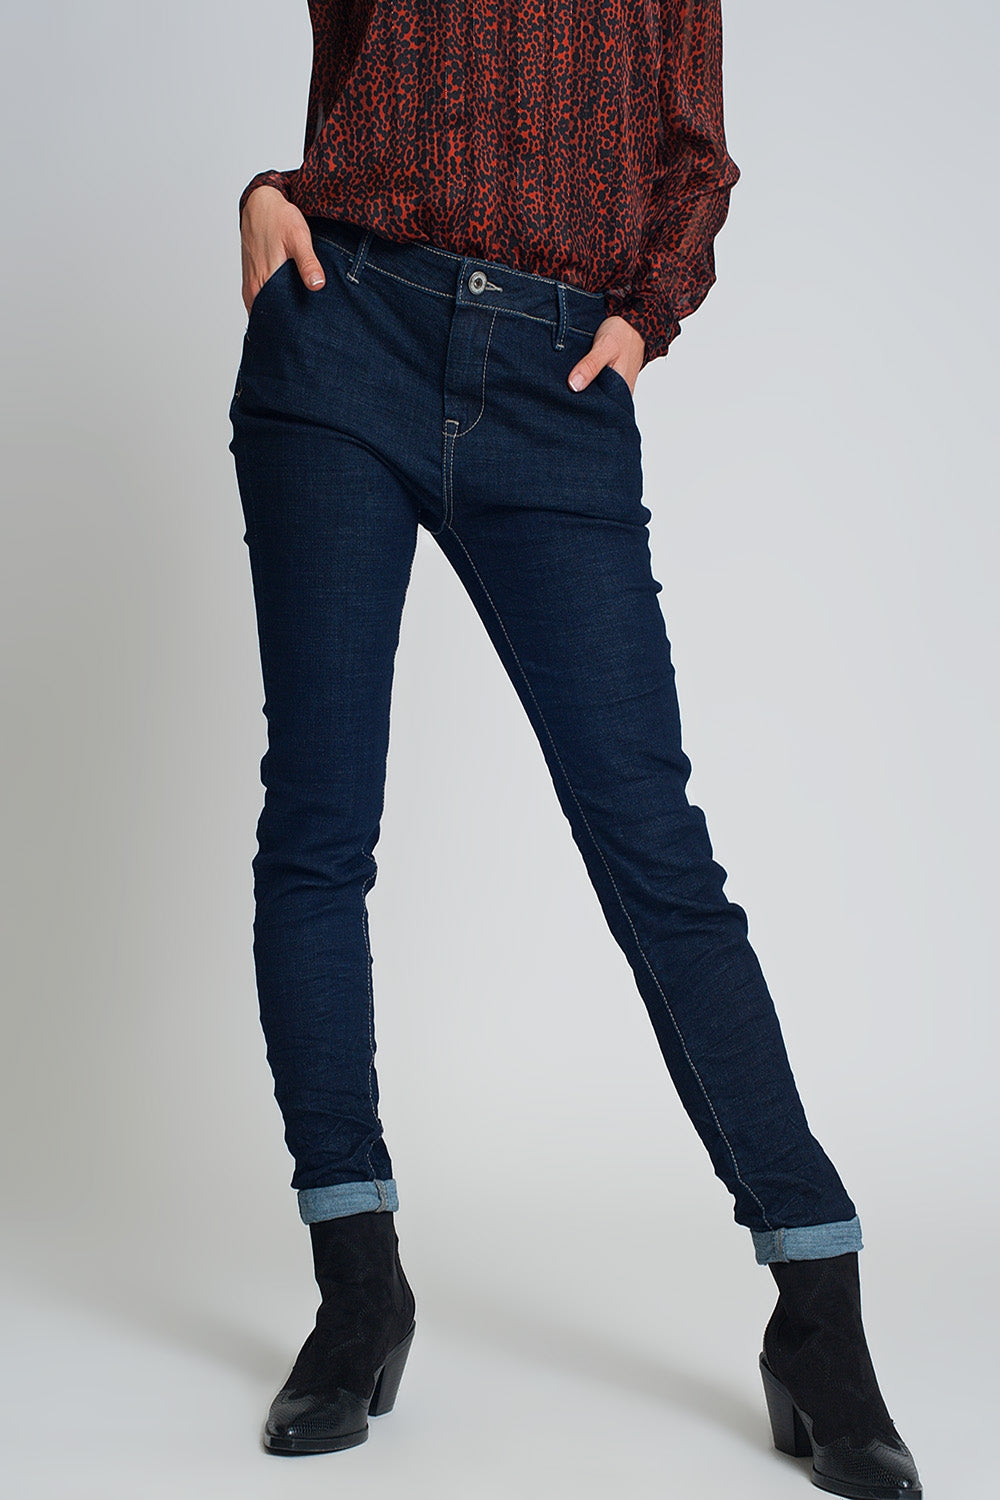 Q2 Jeans skinny cut chino style